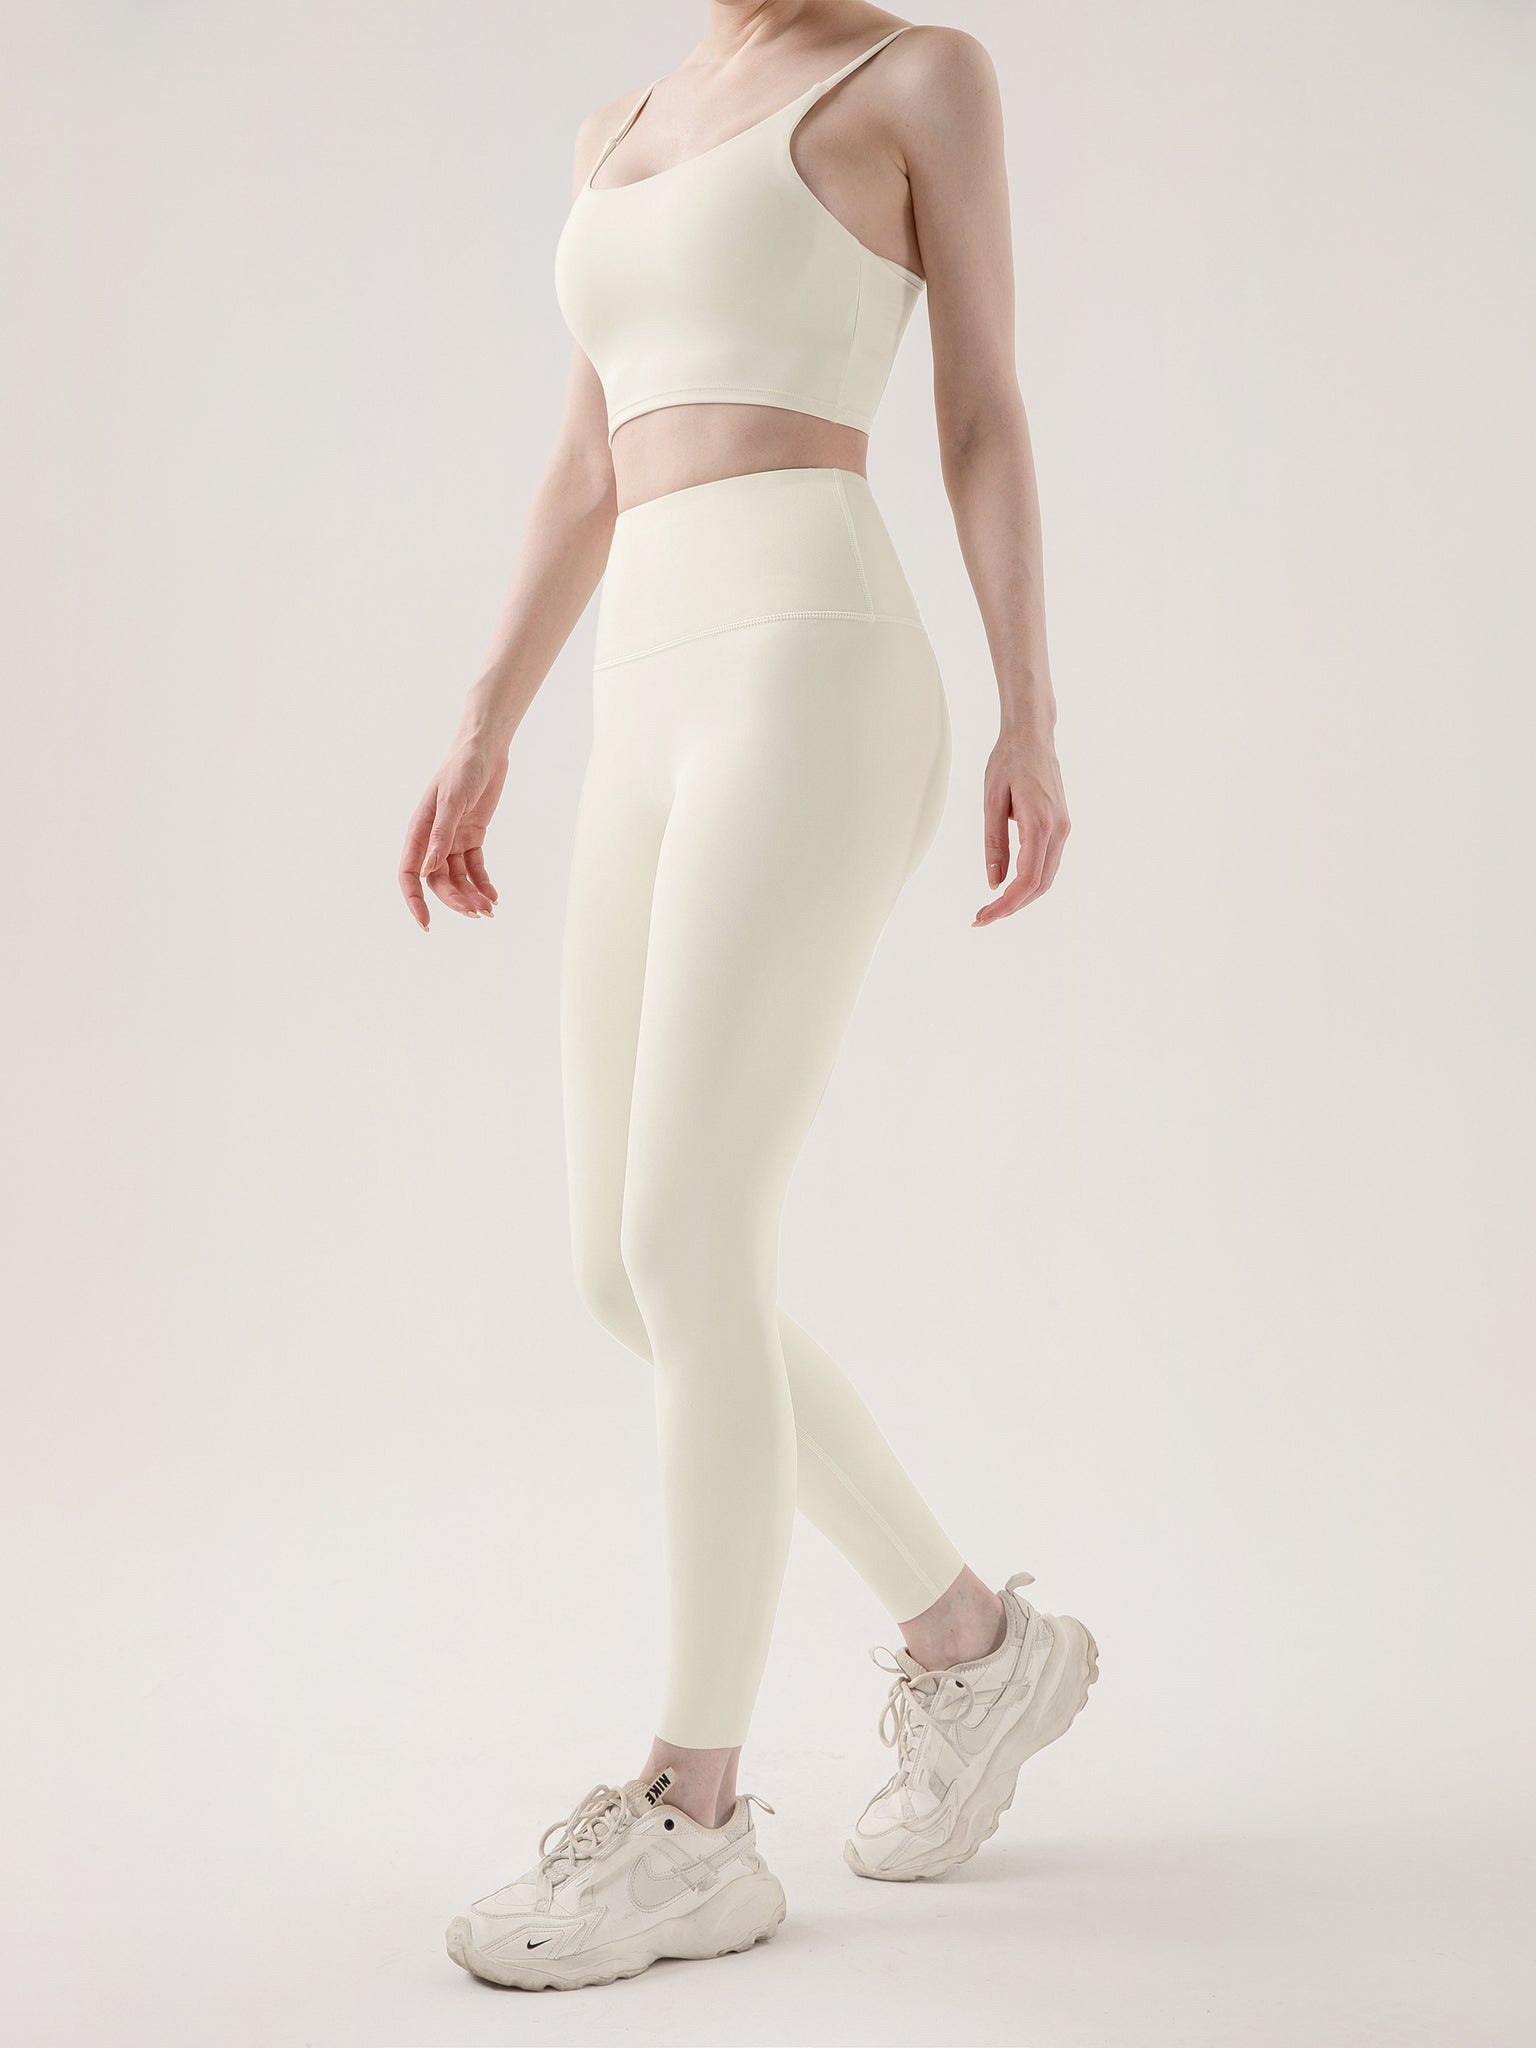 Girls Power Leggings - Ivory White: Unleash Your Power in Style – Click  Holic Activewear